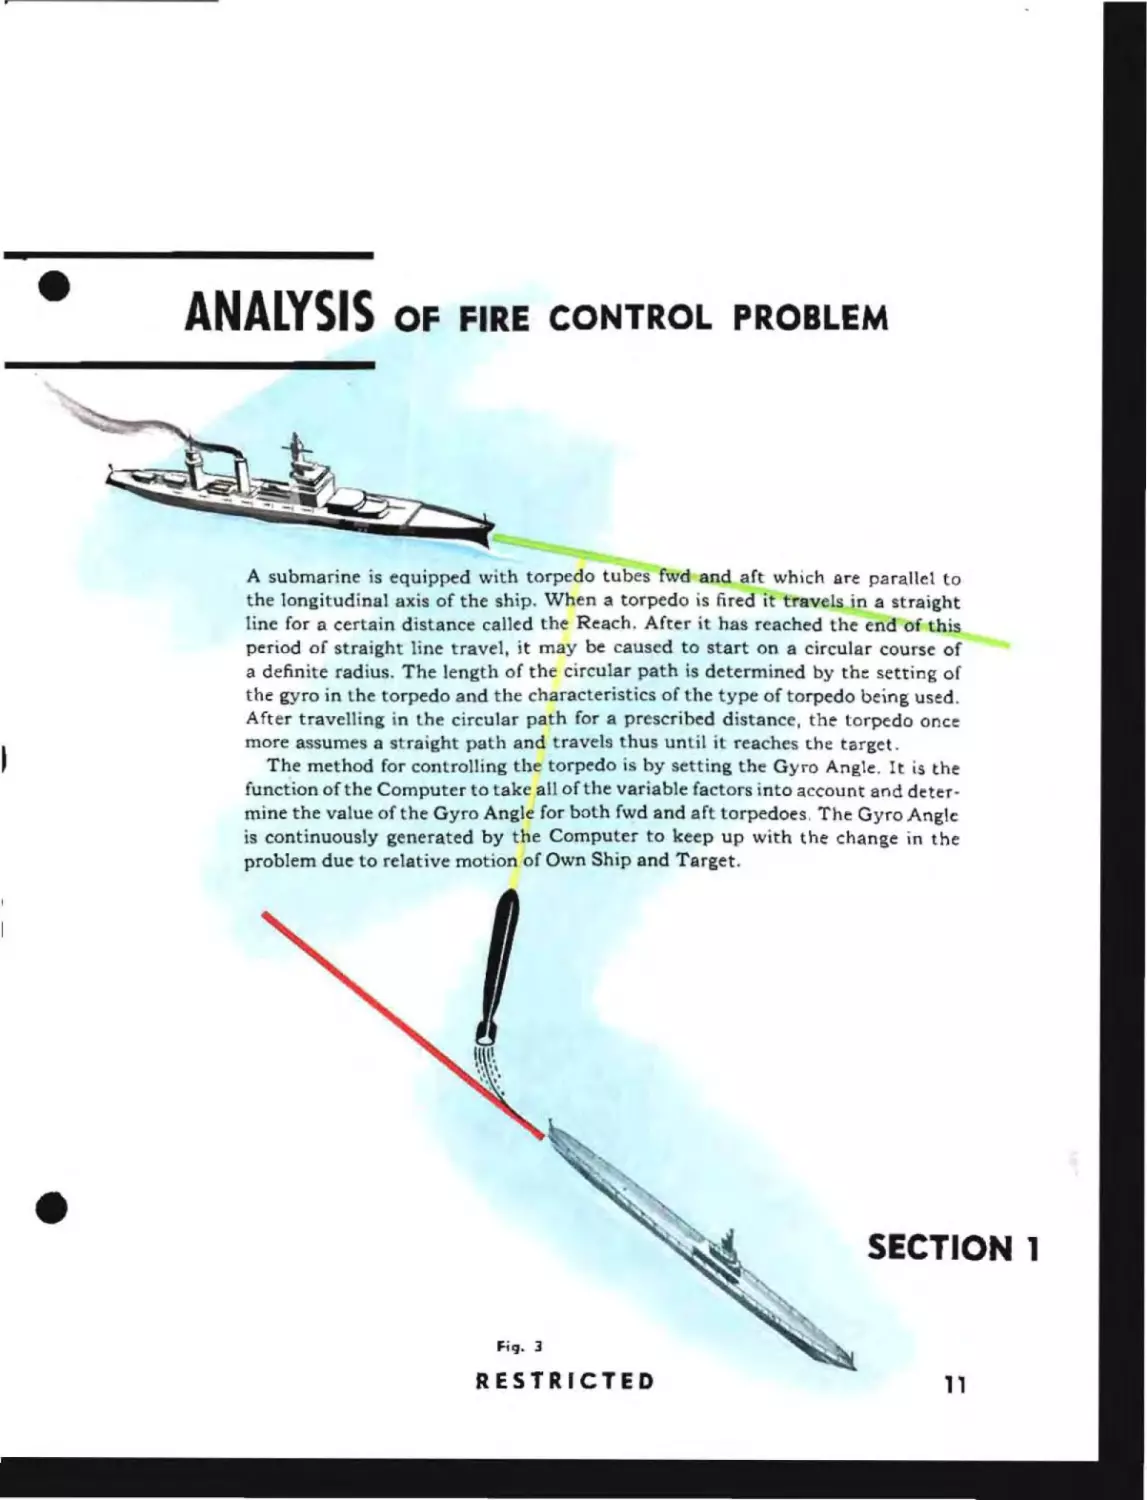 Page 11, Analysis of Fire Control Problem